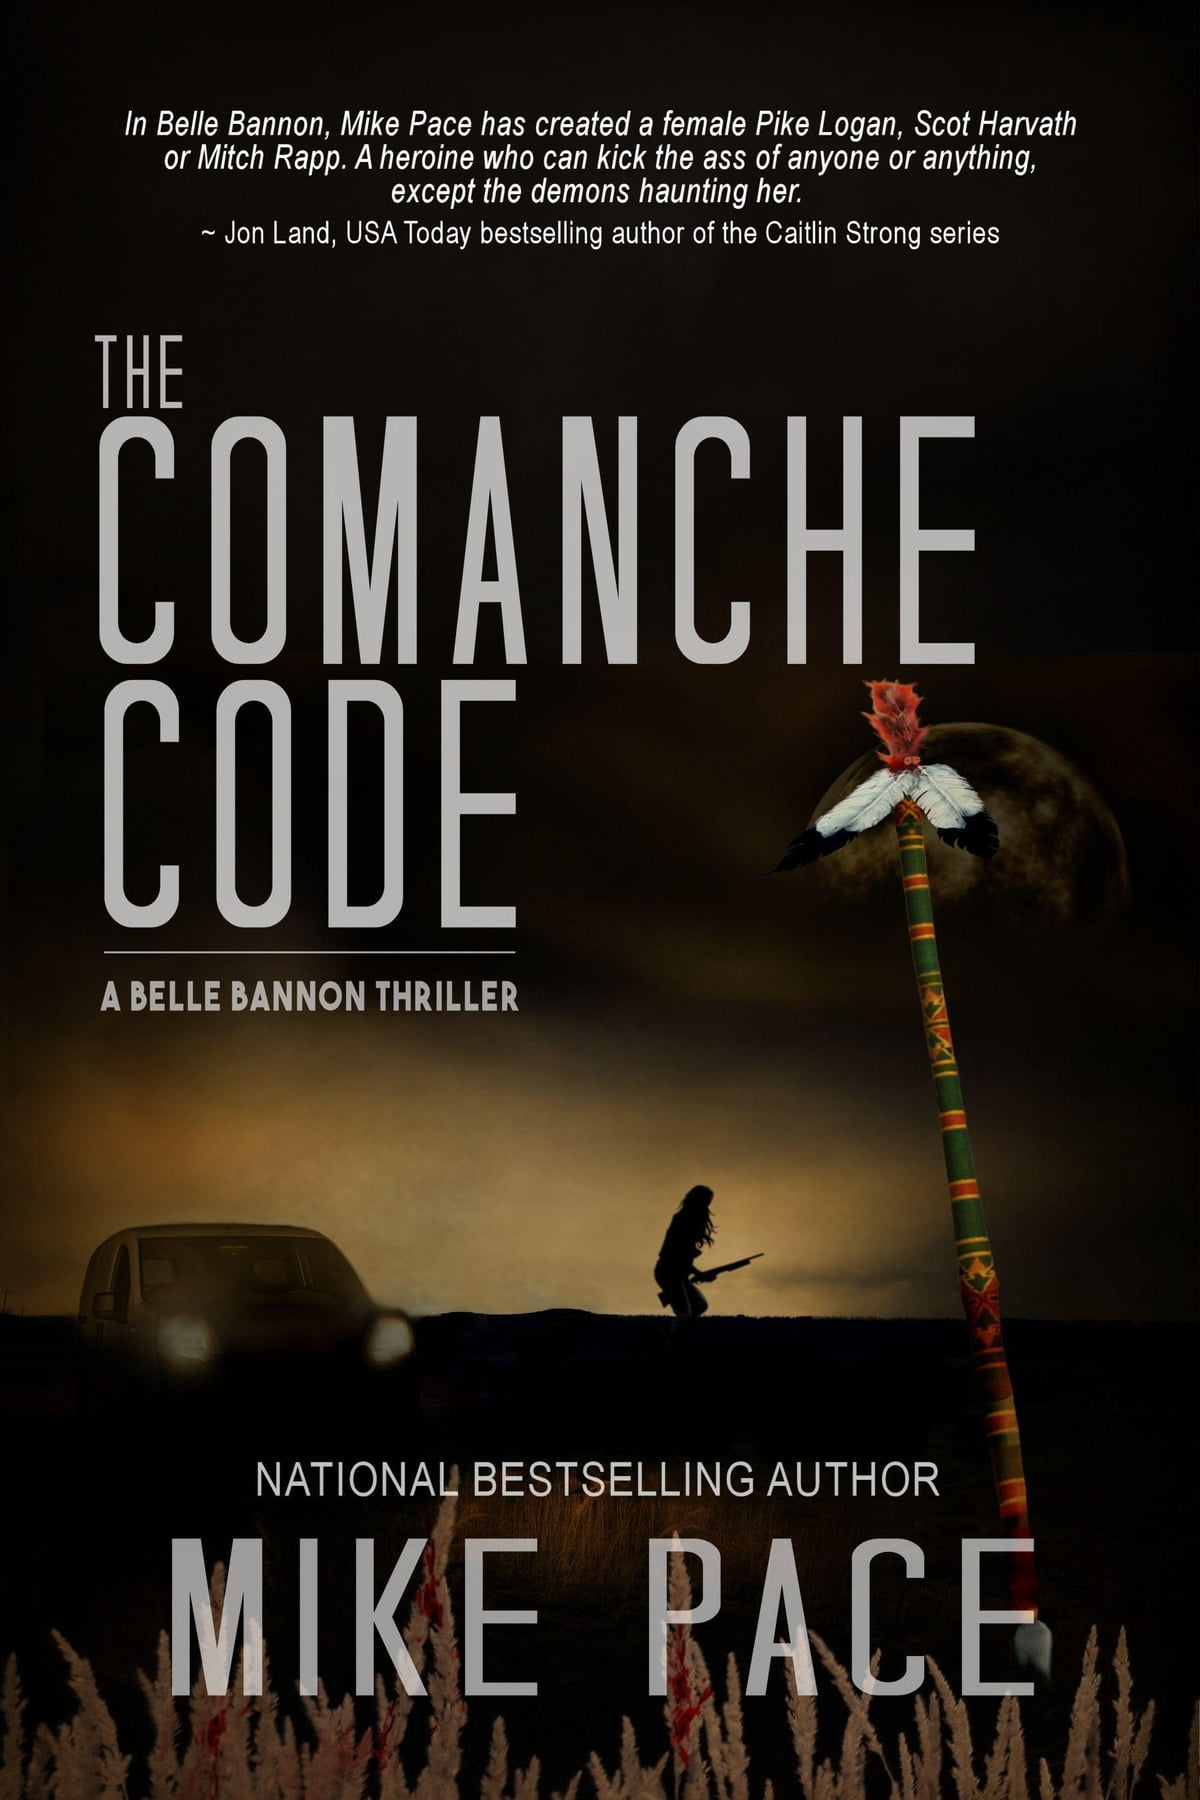 The Comanche Code by Mike Pace